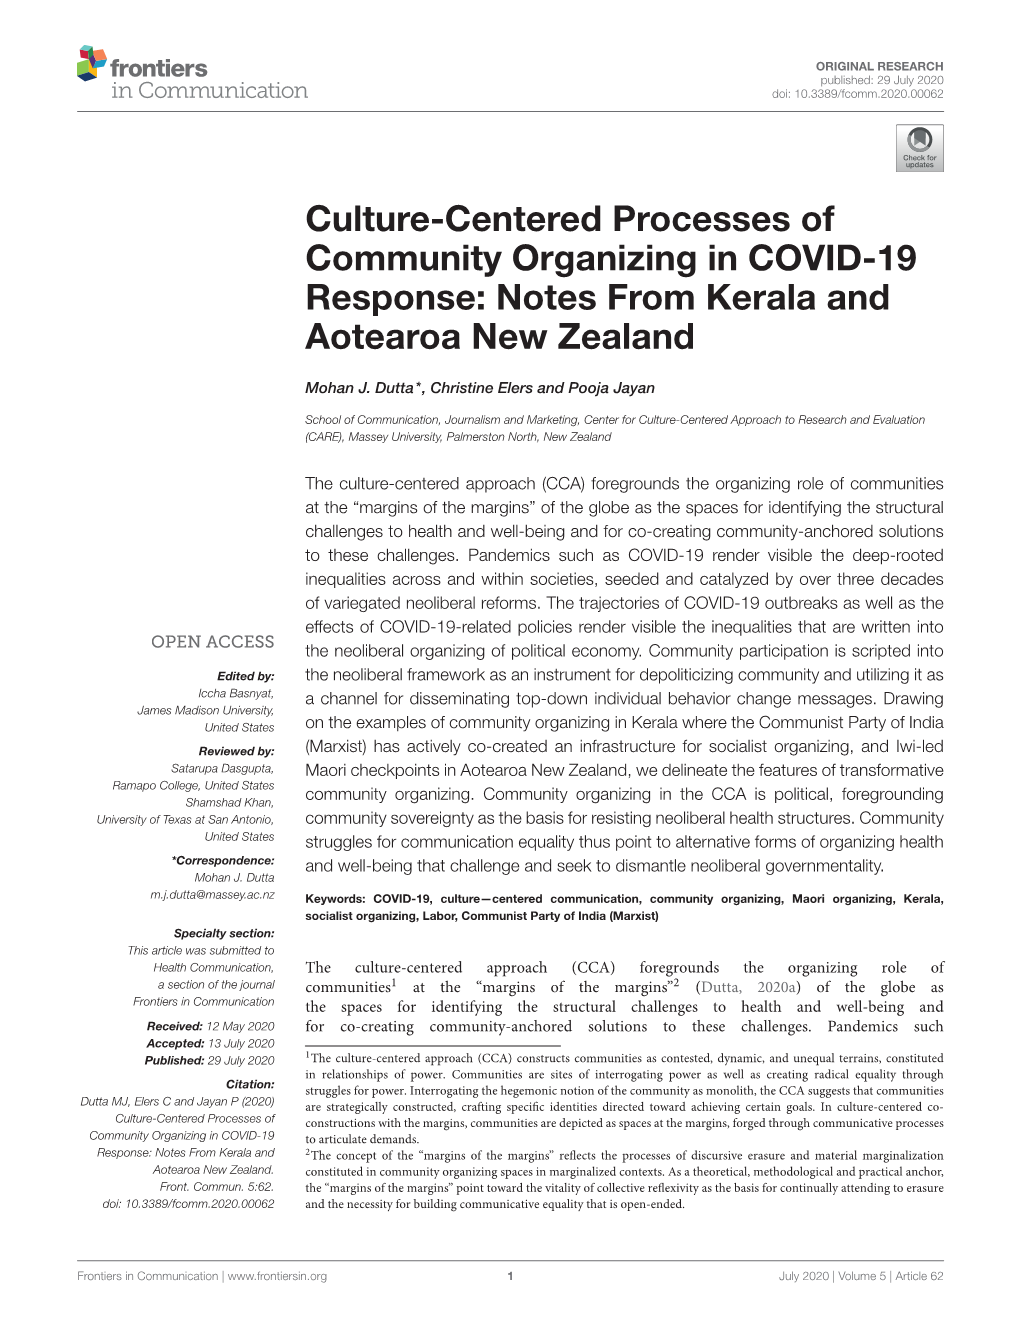 Culture-Centered Processes of Community Organizing in COVID-19 Response: Notes from Kerala and Aotearoa New Zealand